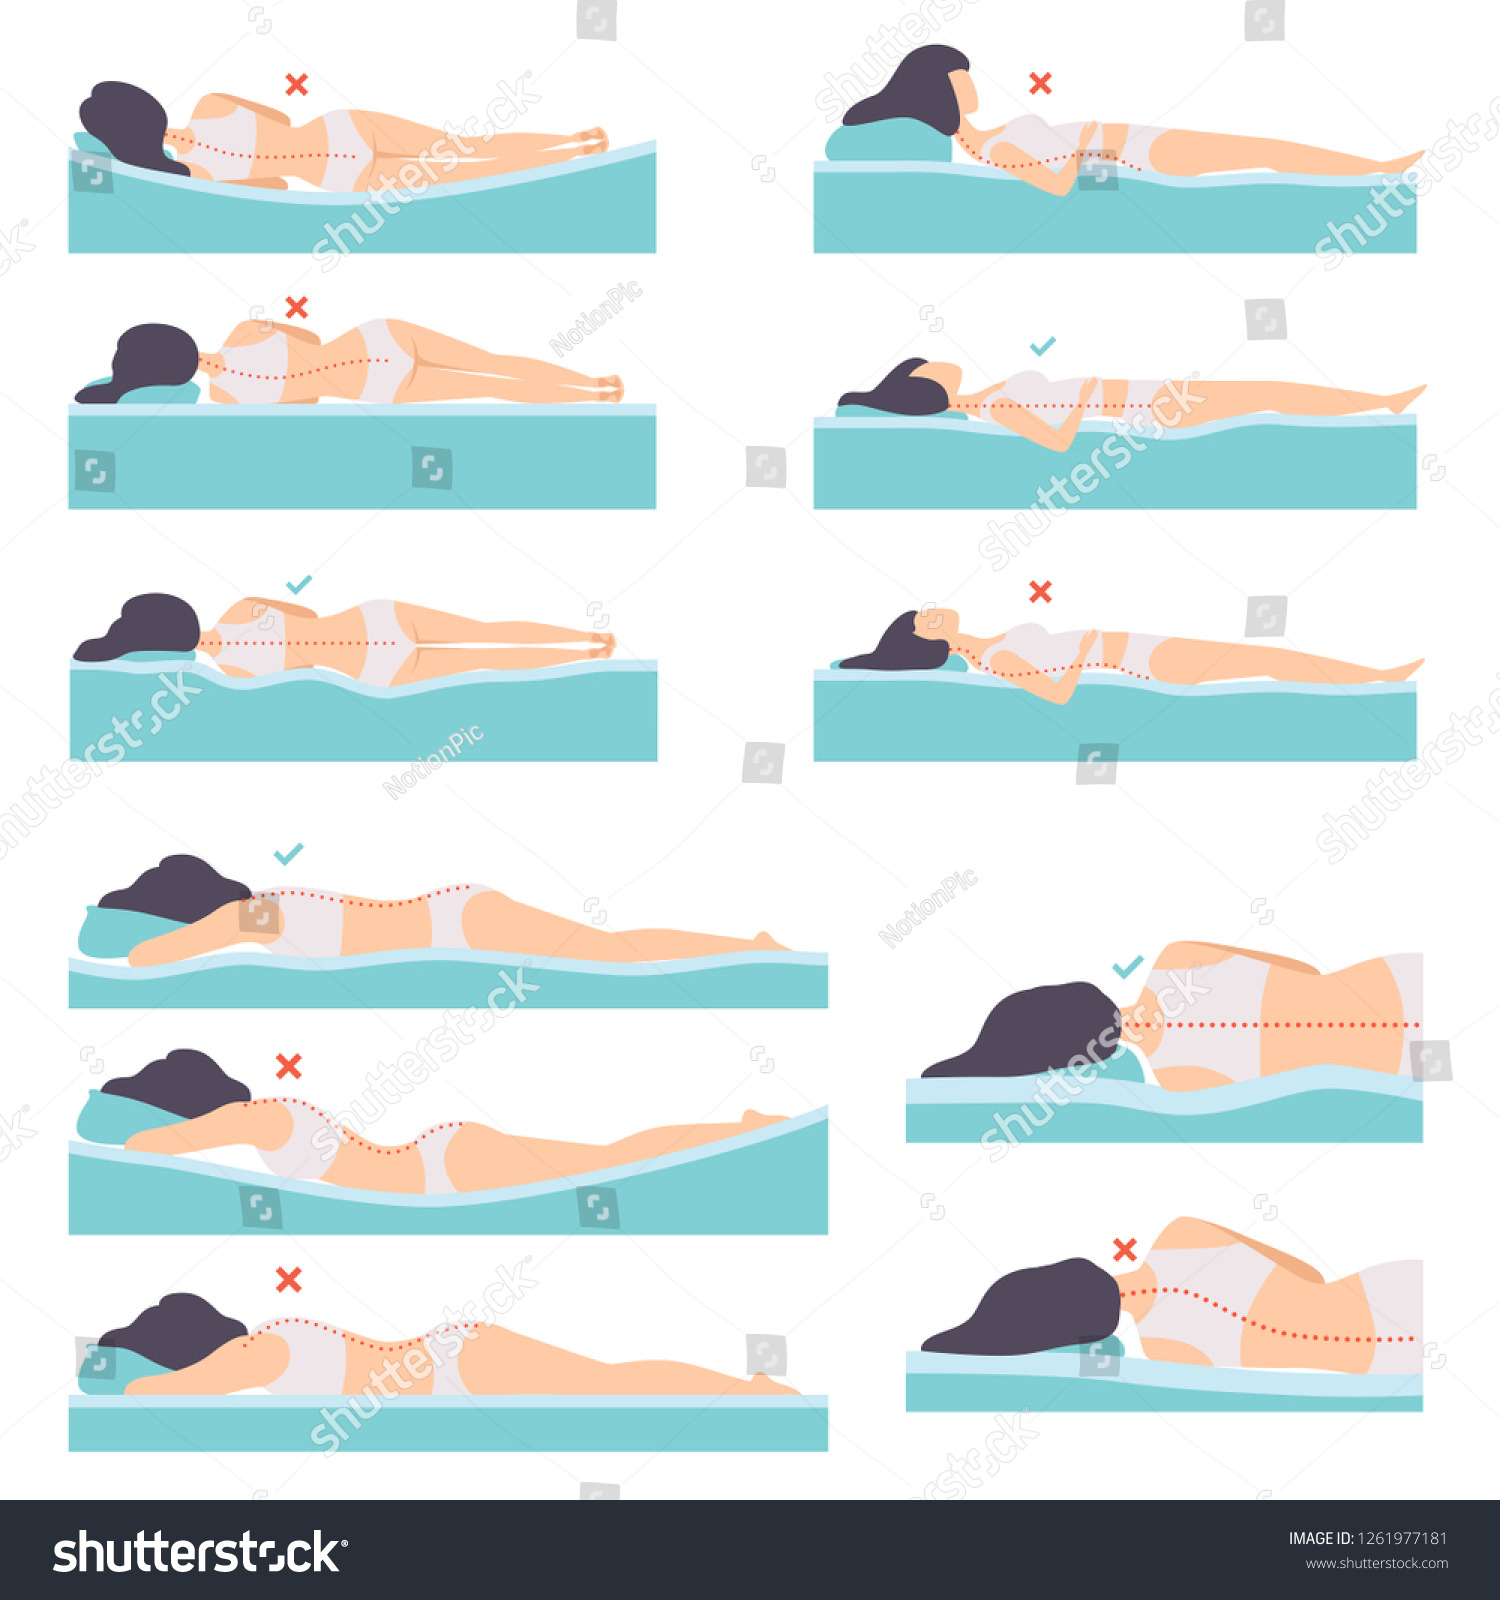 SVG of Woman lying in various poses set, side view, correct and incorrect sleeping posture for neck and spine, healthy sleeping position, orthopedic mattresses and pillows vector Illustration svg